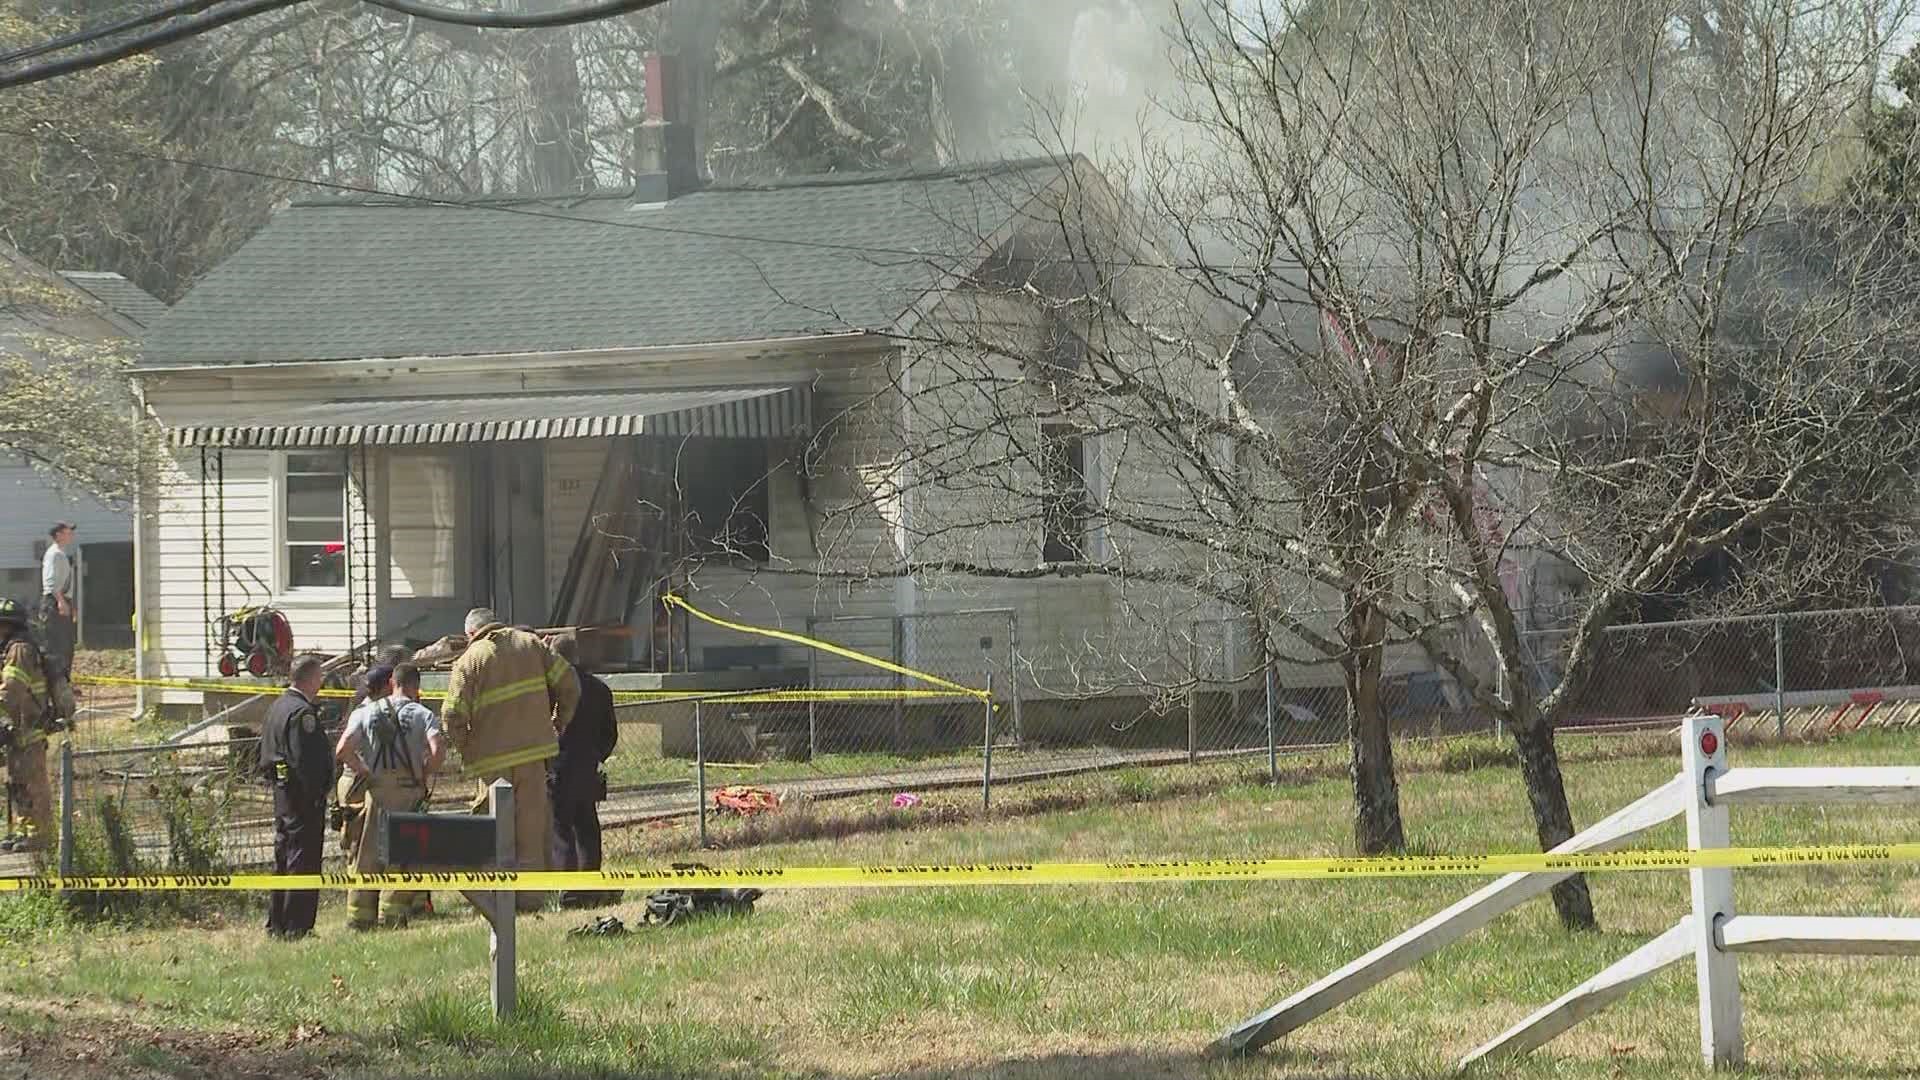 Greensboro fire crews said two children died in a house fire on Glenside Drive. An adult was also injured in the fire.